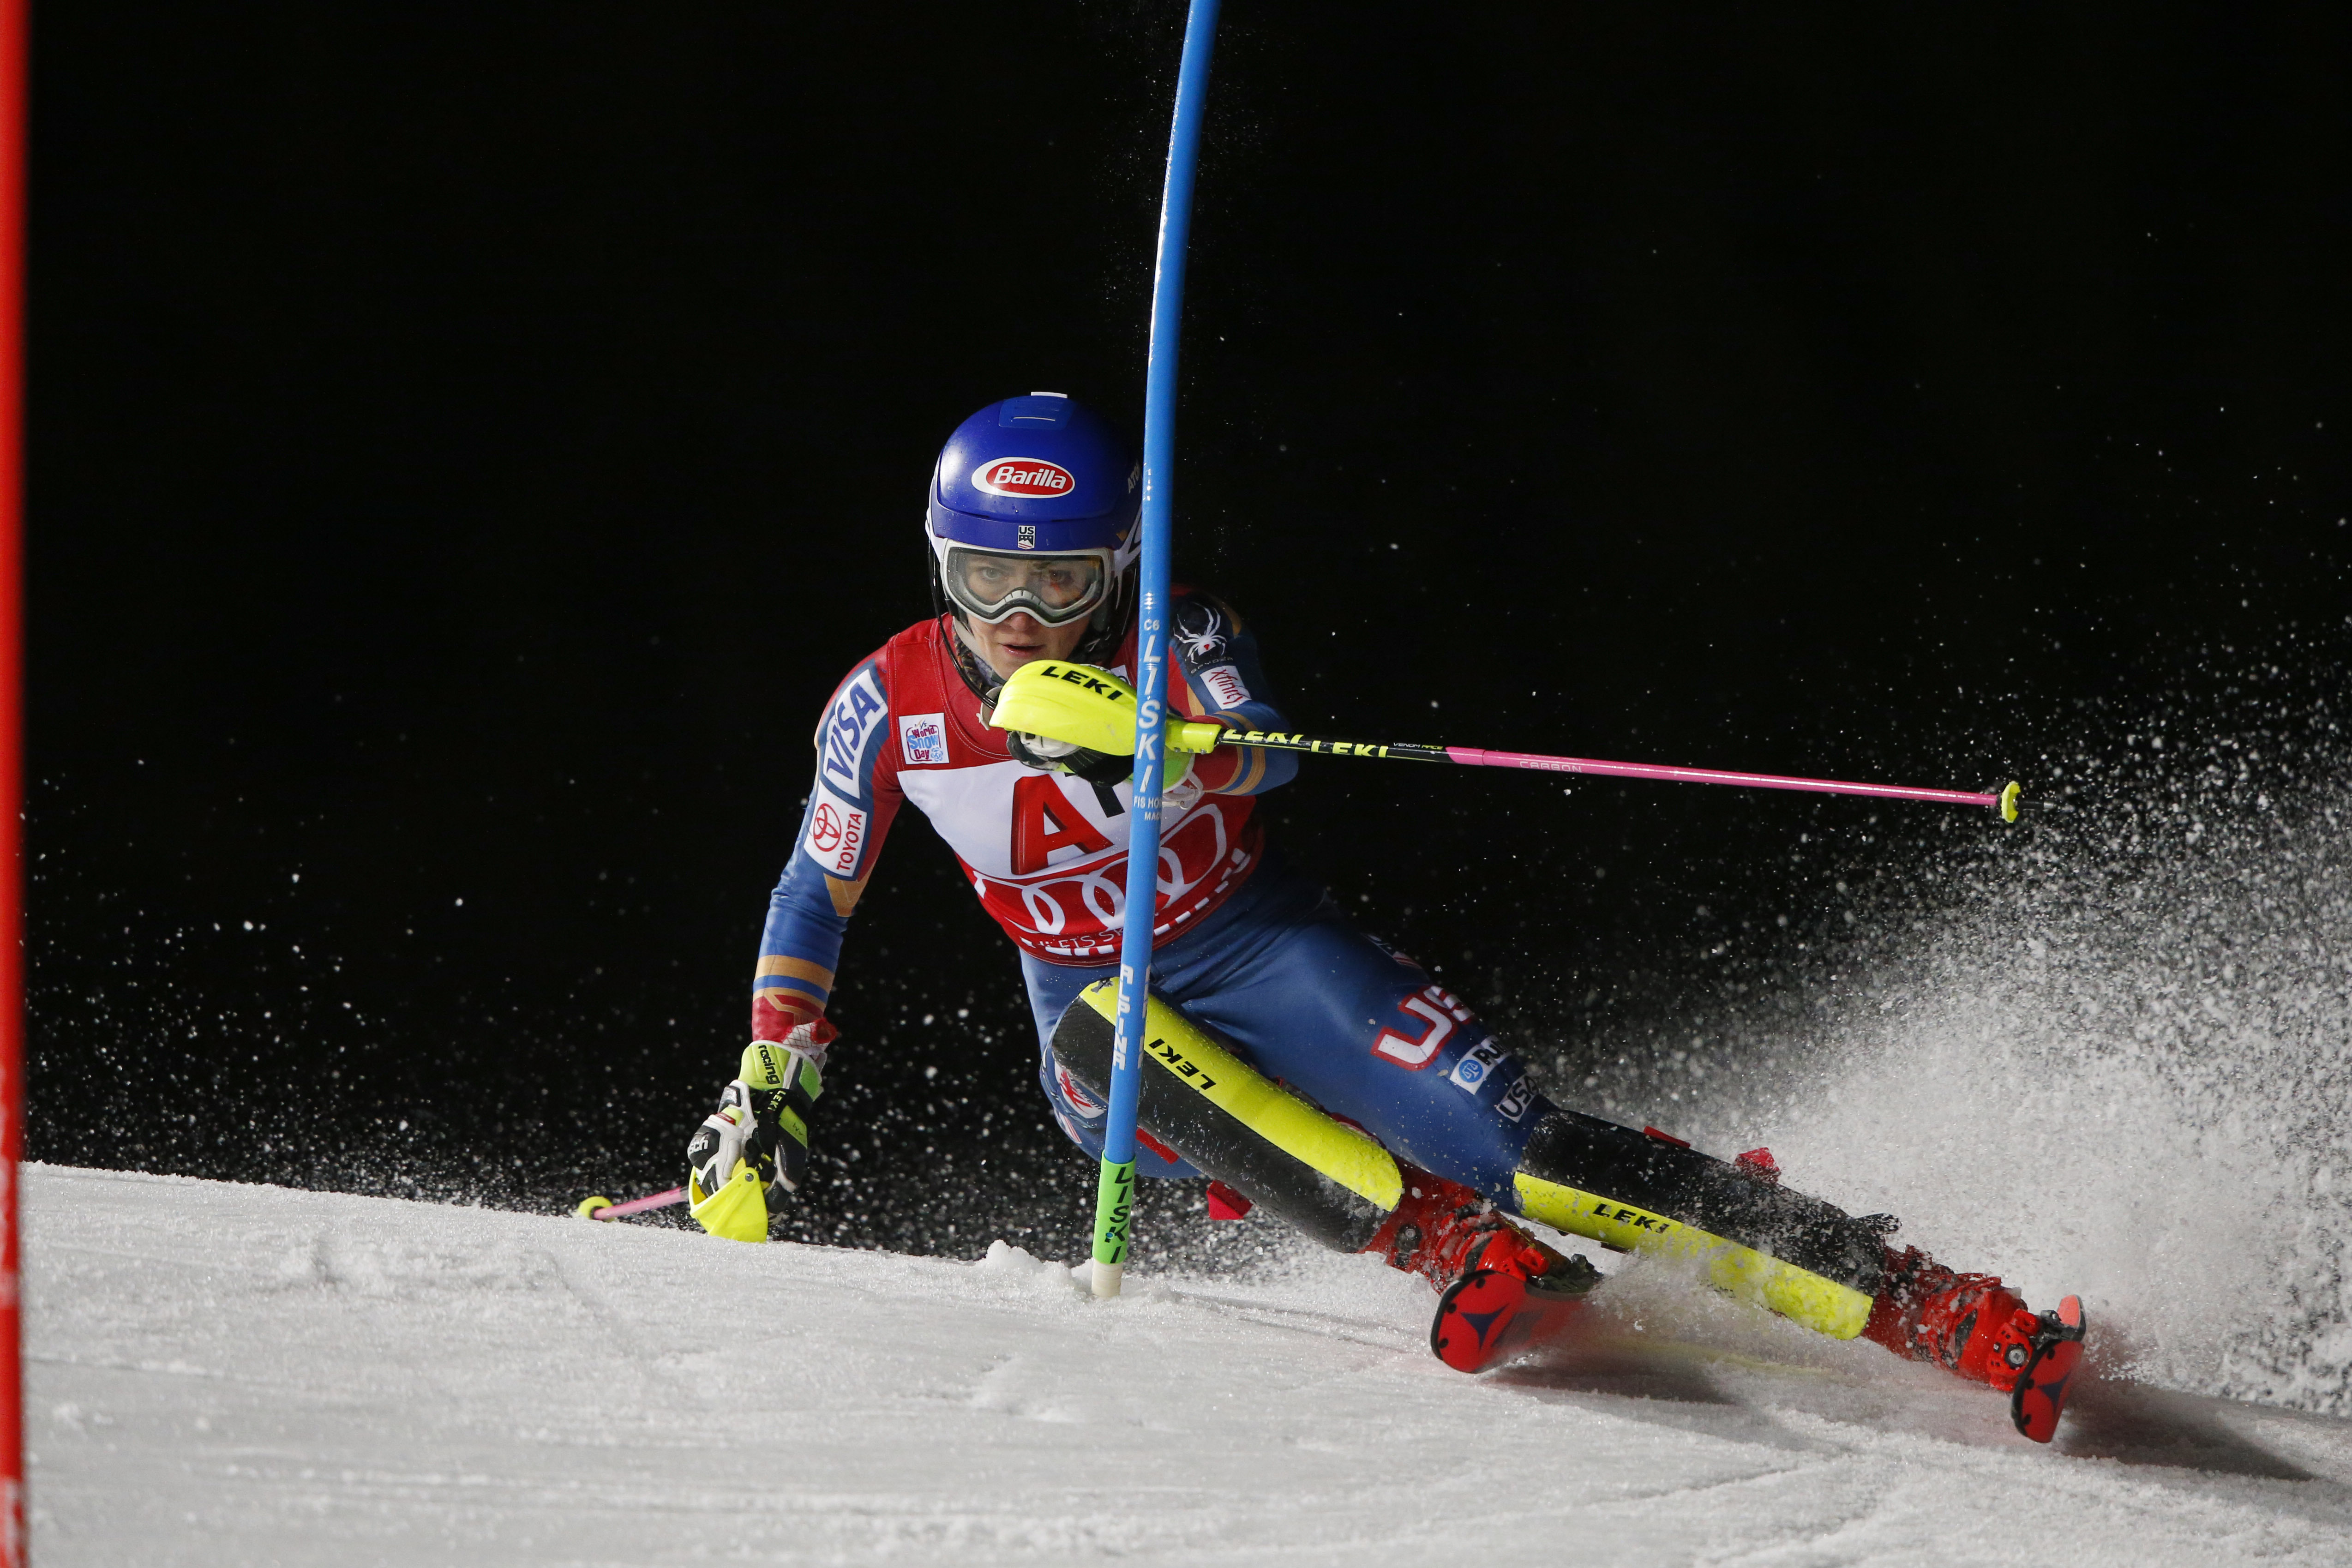 Victory 41 for Shiffrin